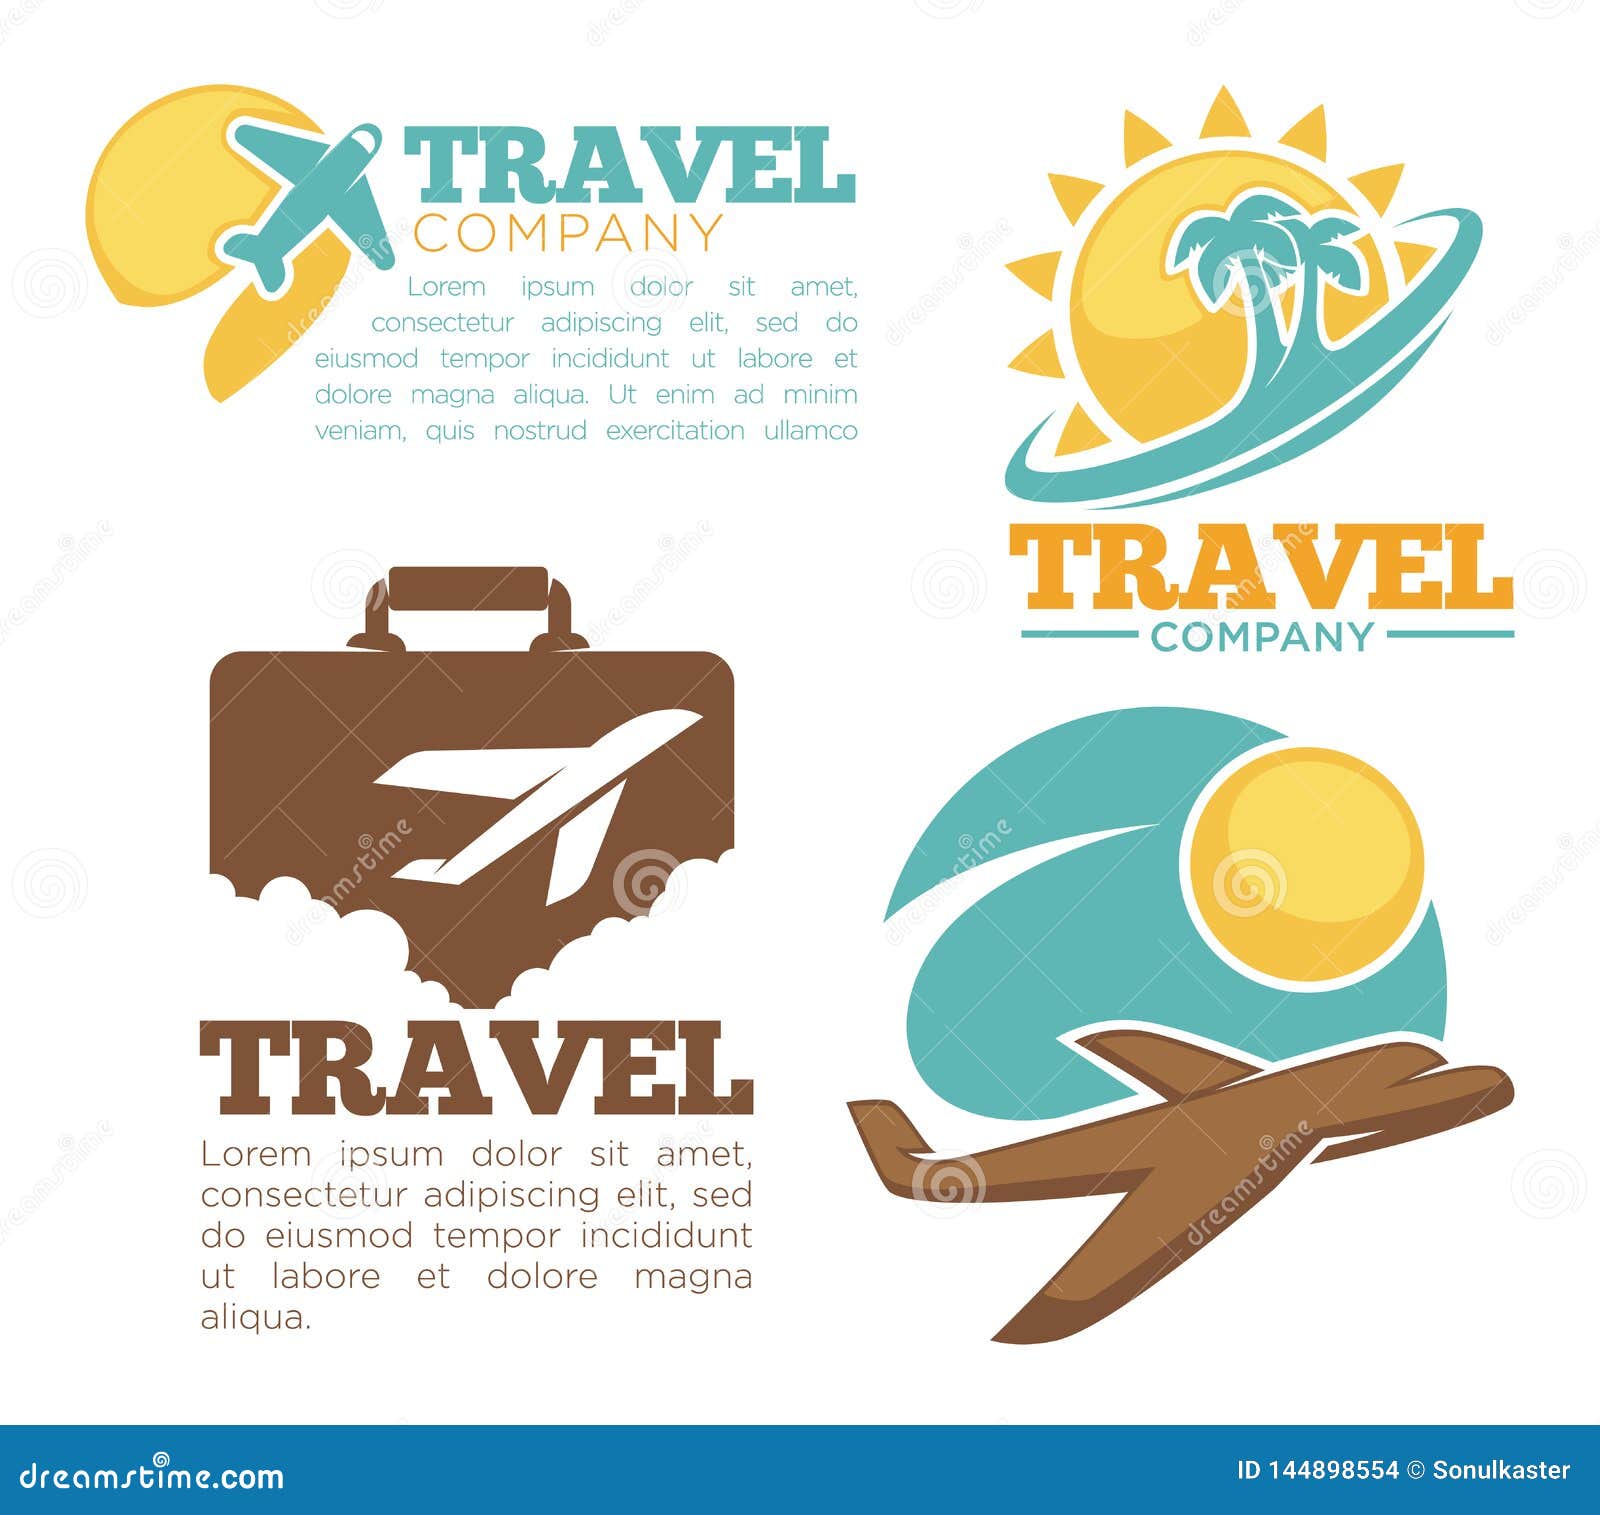 Travel Agency Isolated Icons Plane And Flight Tropical Island Stock Vector Illustration Of Landscape Destination